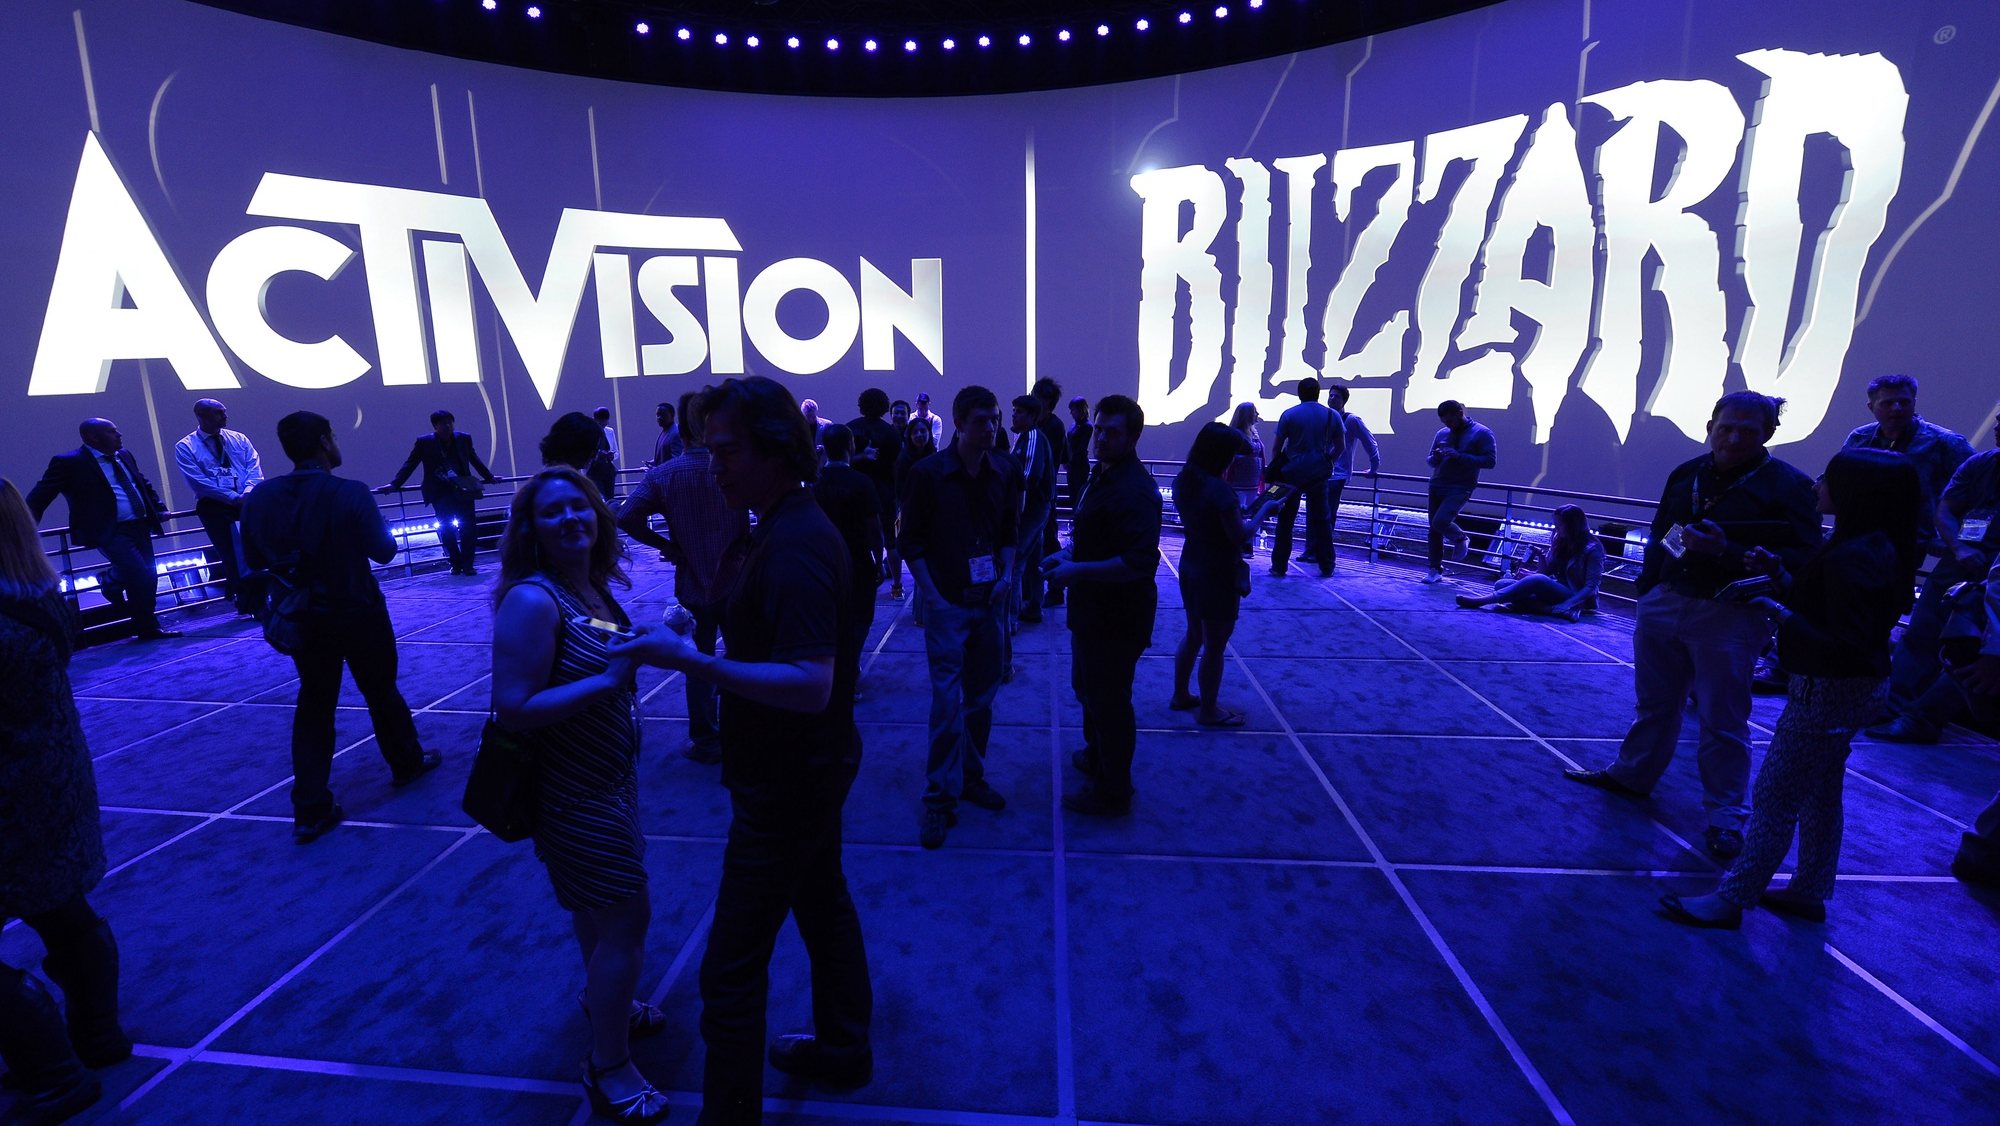 epa09693177 (FILE) - Attendees gather at the Activision Blizzard exhibit at the E3 (Electronic Entertainment Expo) in Los Angeles, California, USA, 12 June 2013 (reissued 18 January 2022). Microsoft on 18 January 2022 in a press release confirmed it will ill acquire video games giant Activision Blizzard &quot;in an all-cash transaction valued at 68.7 billion US dollars.&quot; The deal forms the biggest takeover by Microsoft to date.  EPA/MICHAEL NELSON *** Local Caption *** 55533336